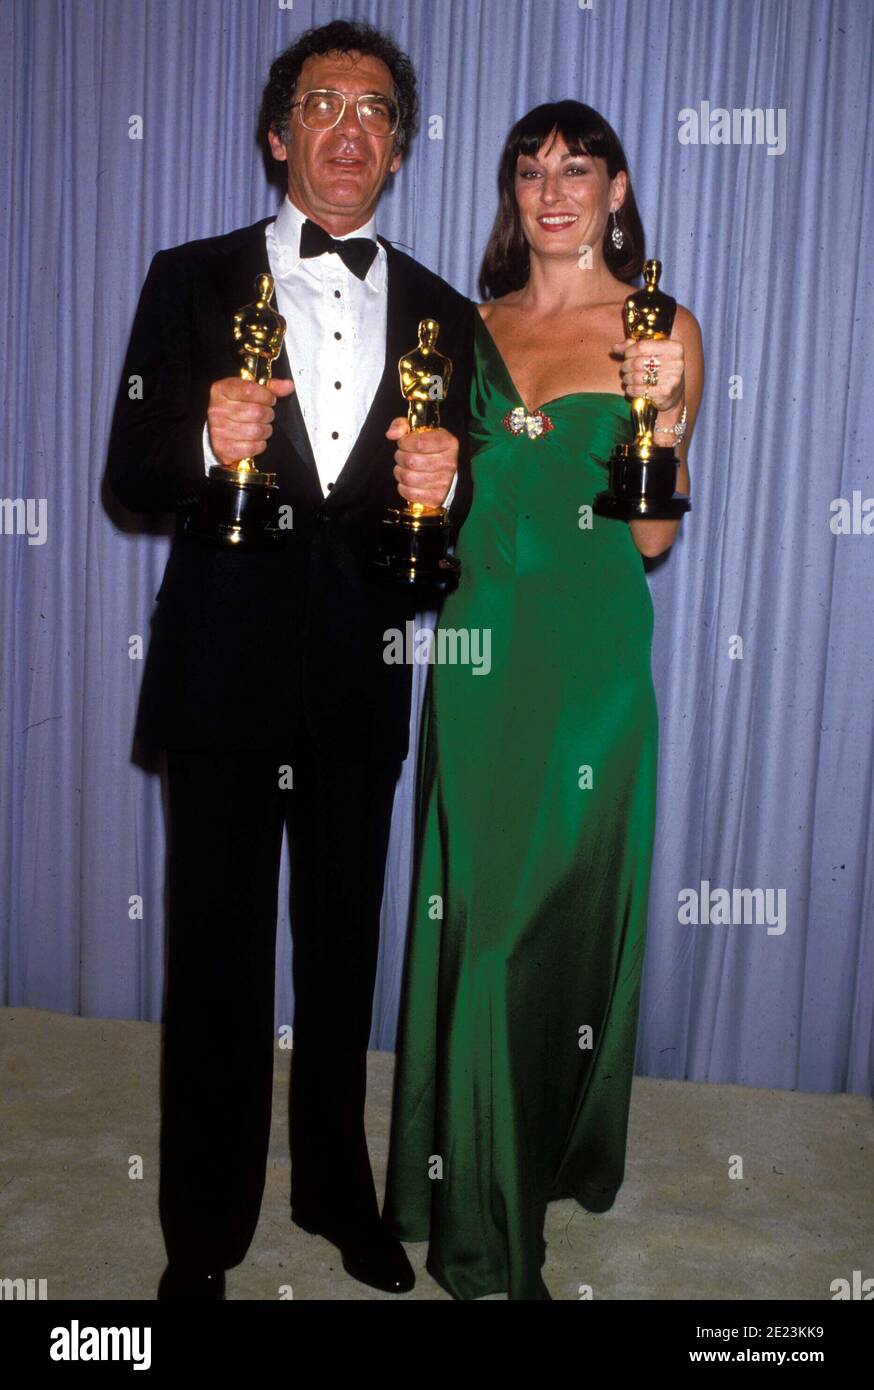 Sydney Pollack And Anjelica Huston at the 58th Annual Academy Awards March 24, 1986.   Credit: Ralph Dominguez/MediaPunch Stock Photo